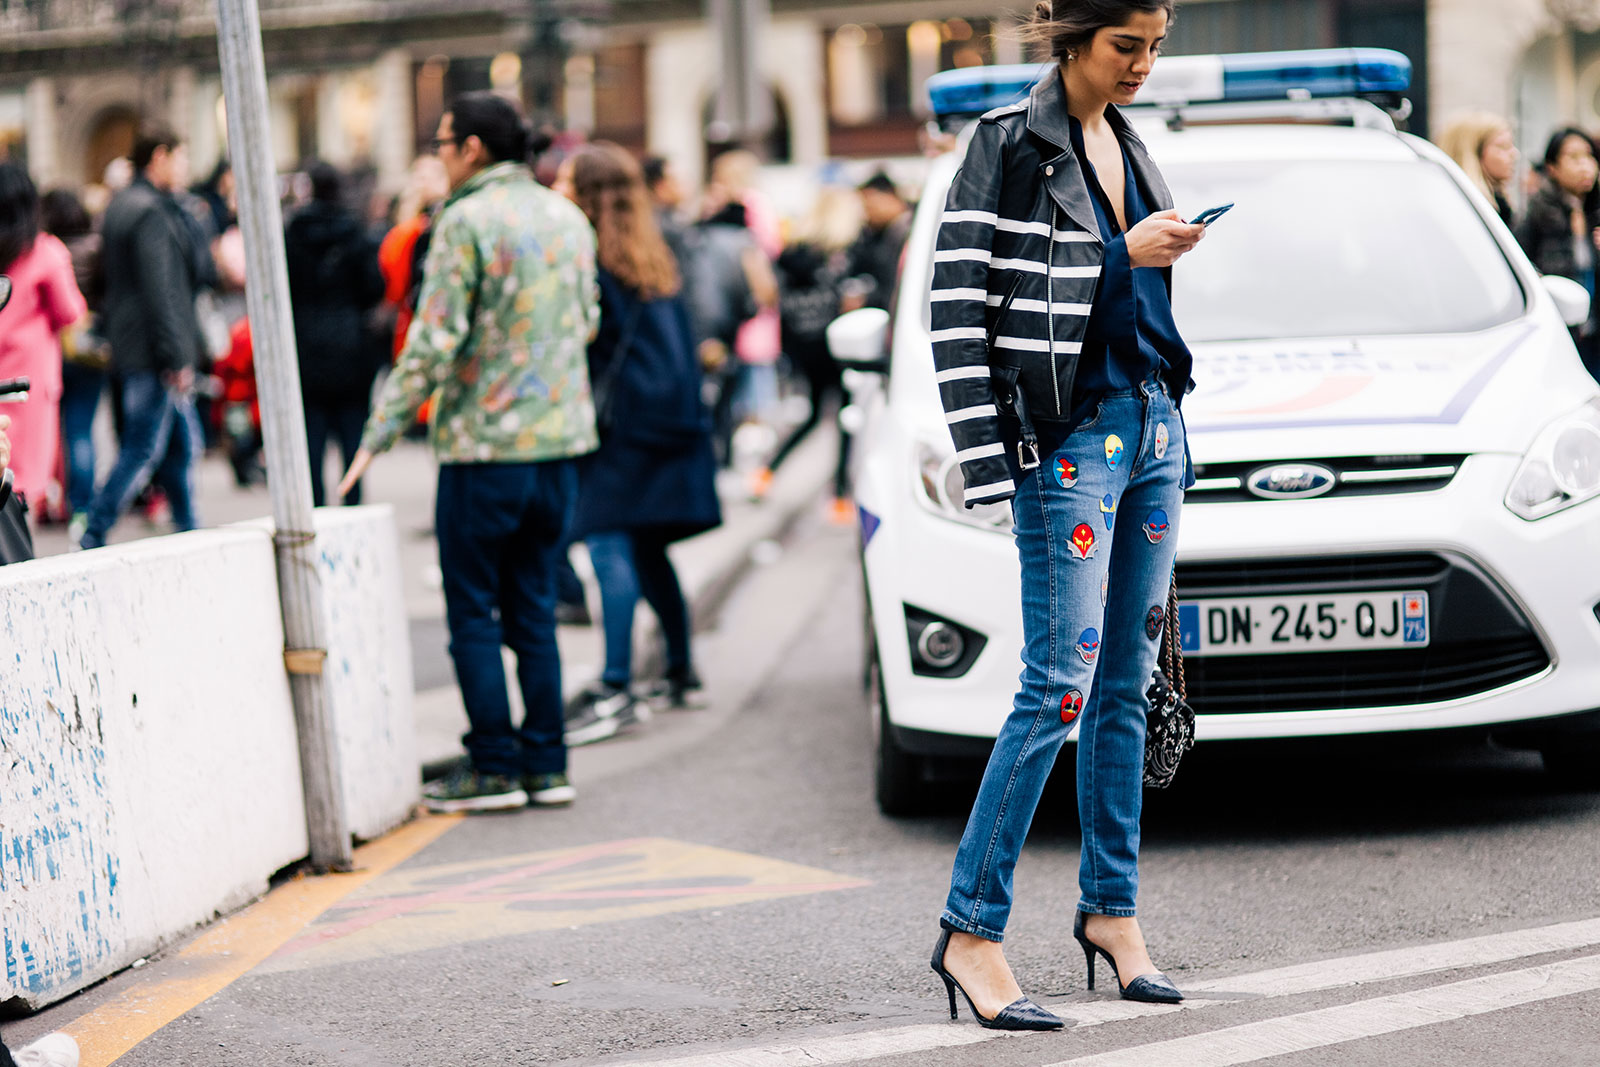 Juliana Salazar wearing Stella McCartney jeans and Each x Other leather jacket before the Stella McCartney Fall 2015 fashion show in Paris, France